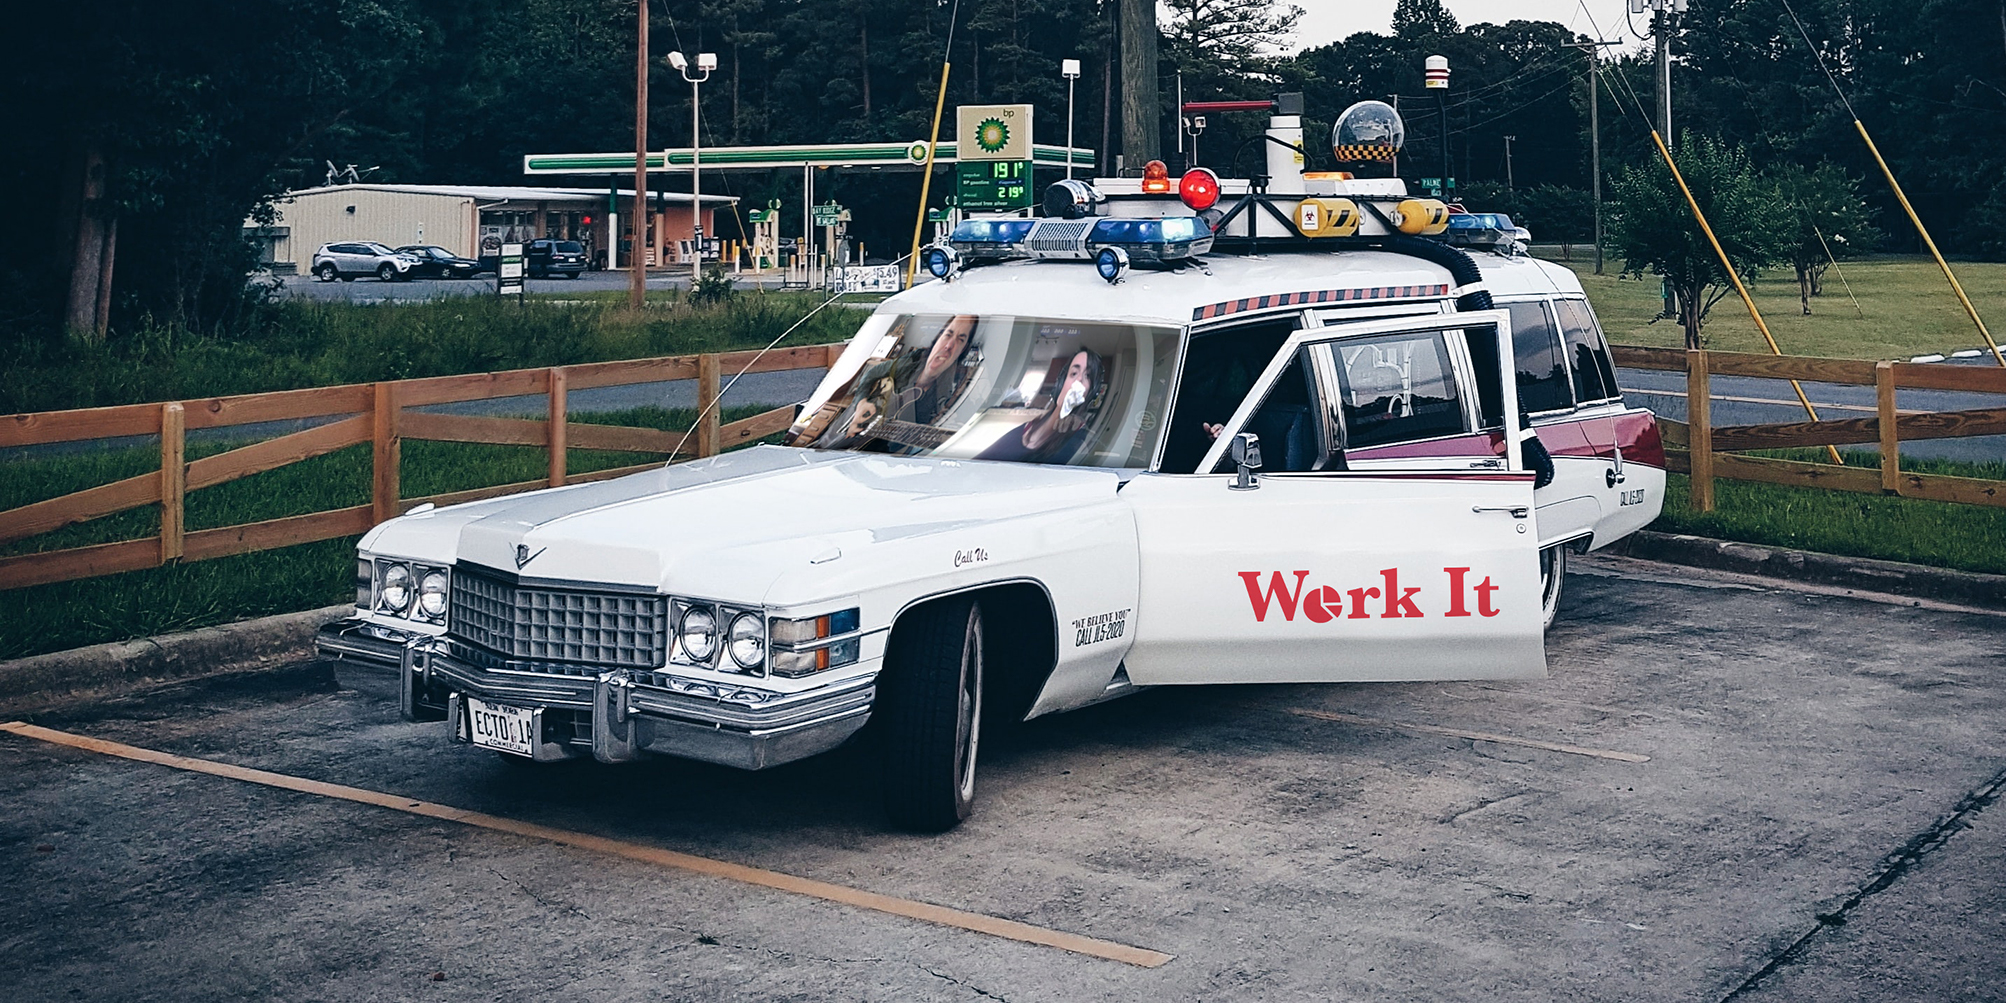 The car from Ghostbusters, with Sam and Janet Photoshopped into the window and a Work It decal on the site